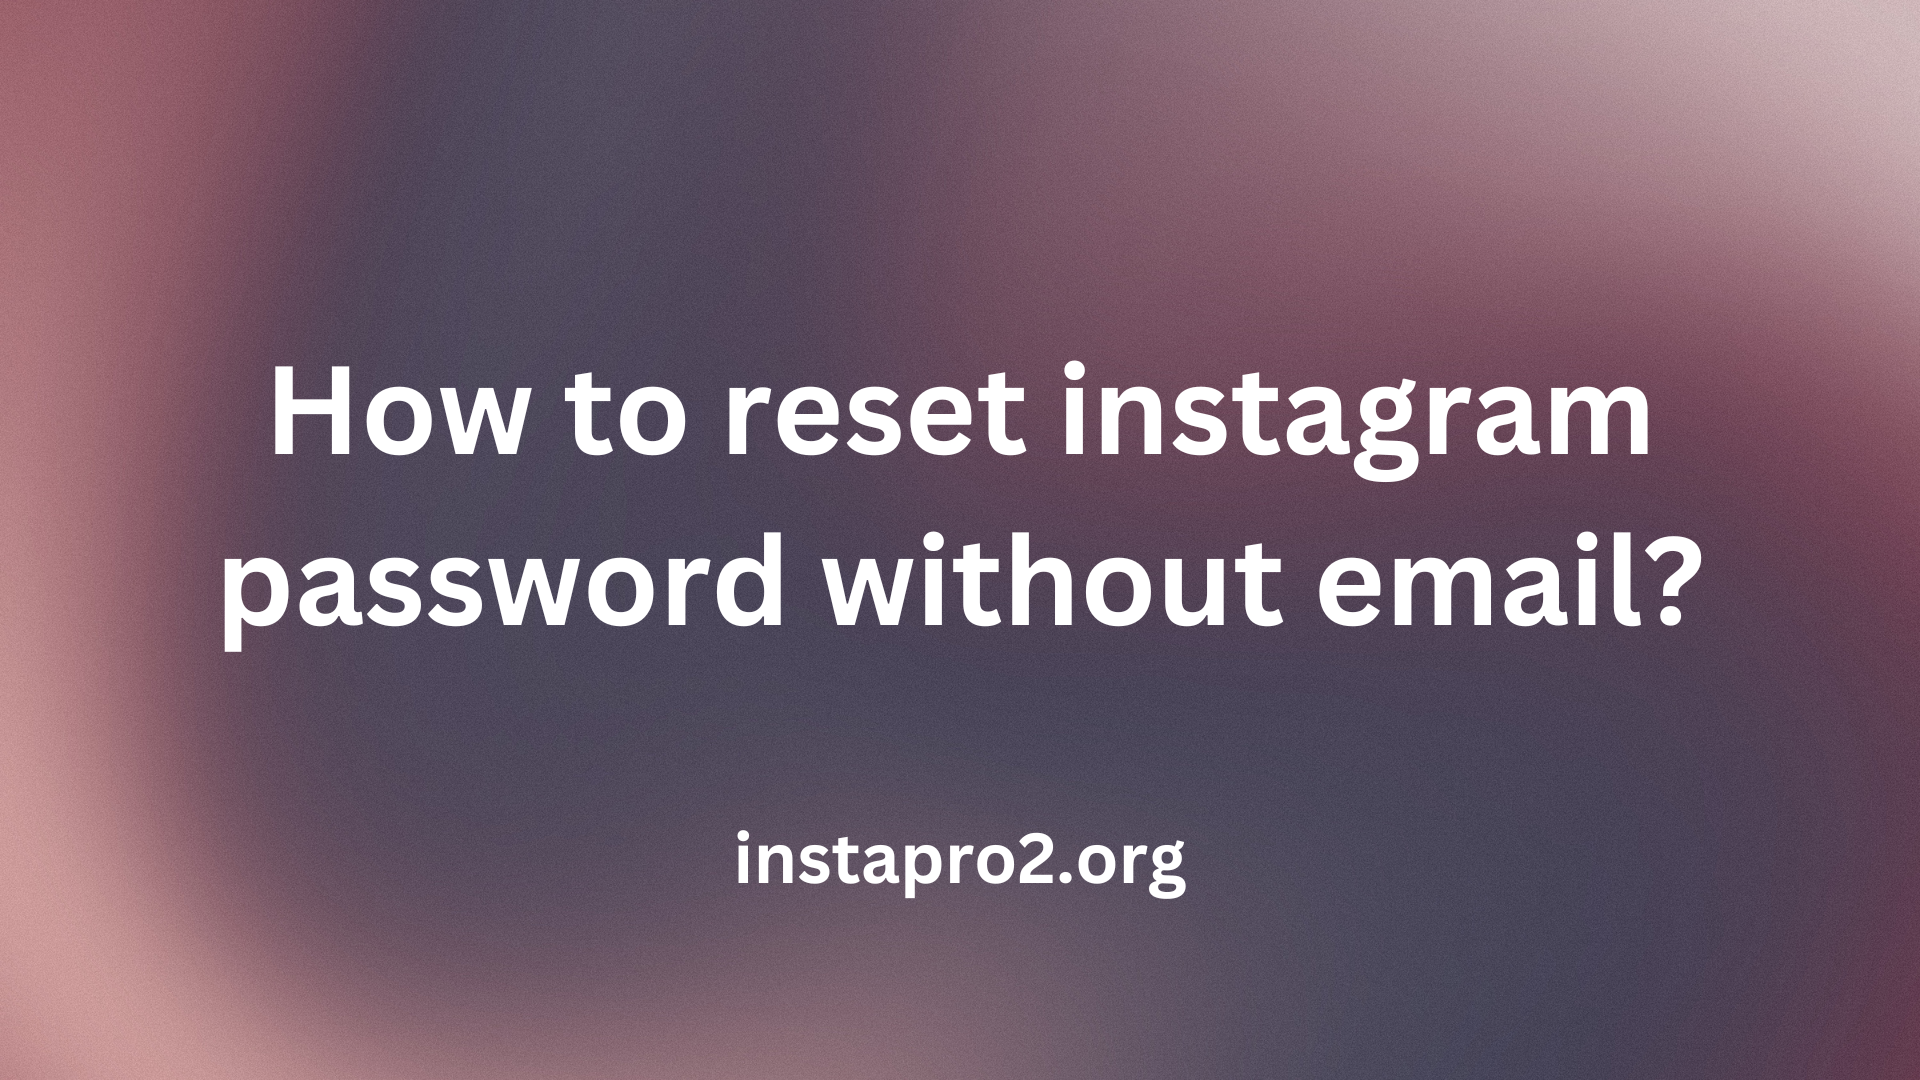 How to reset instagram password without email?